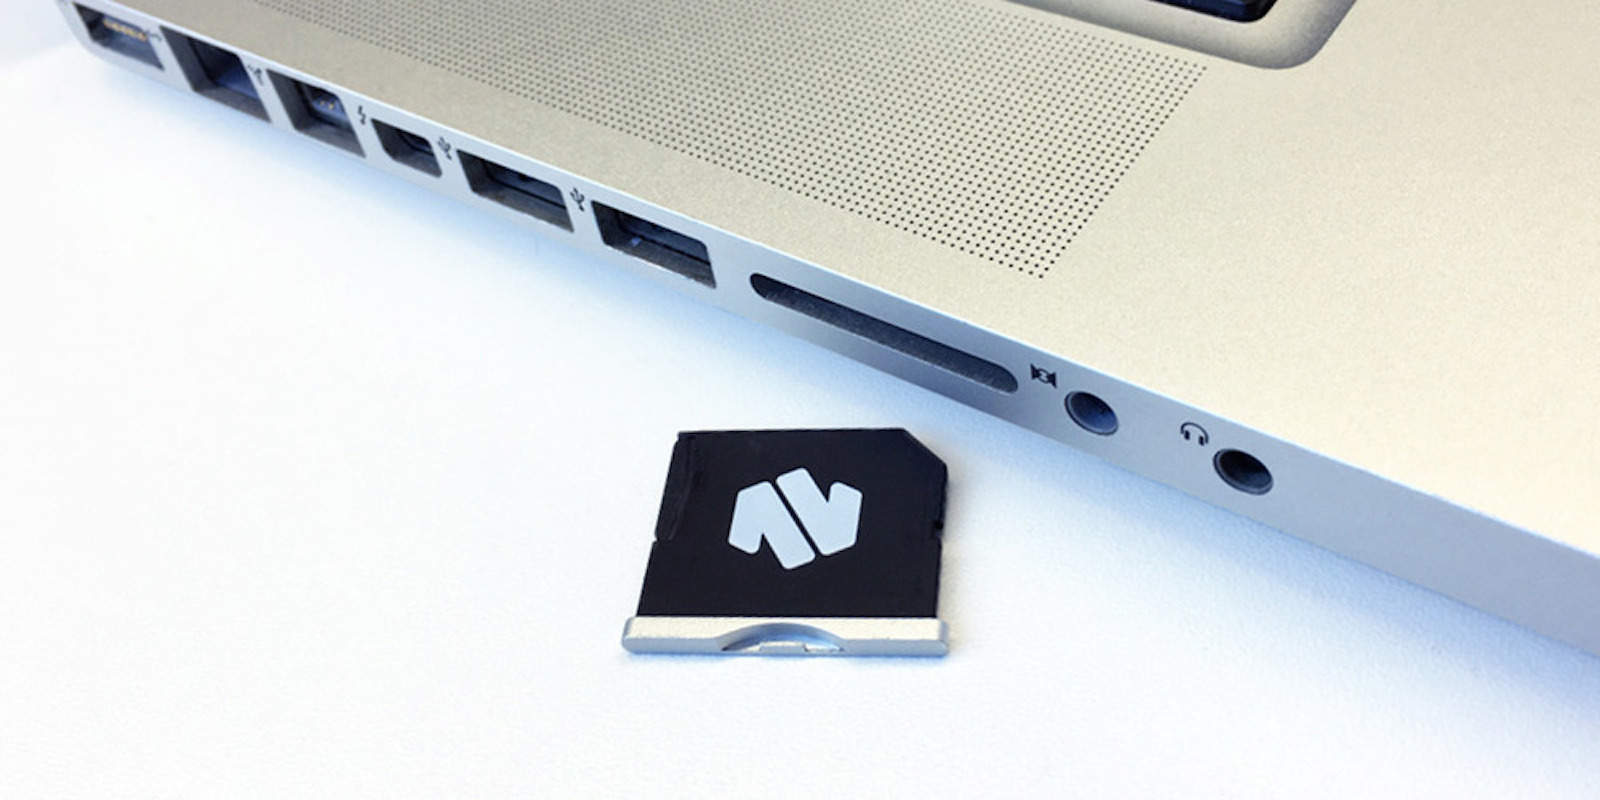 Instantly add up to 256 GB of storage to nearly any MacBook with this carefully designed MicroSD adapter.